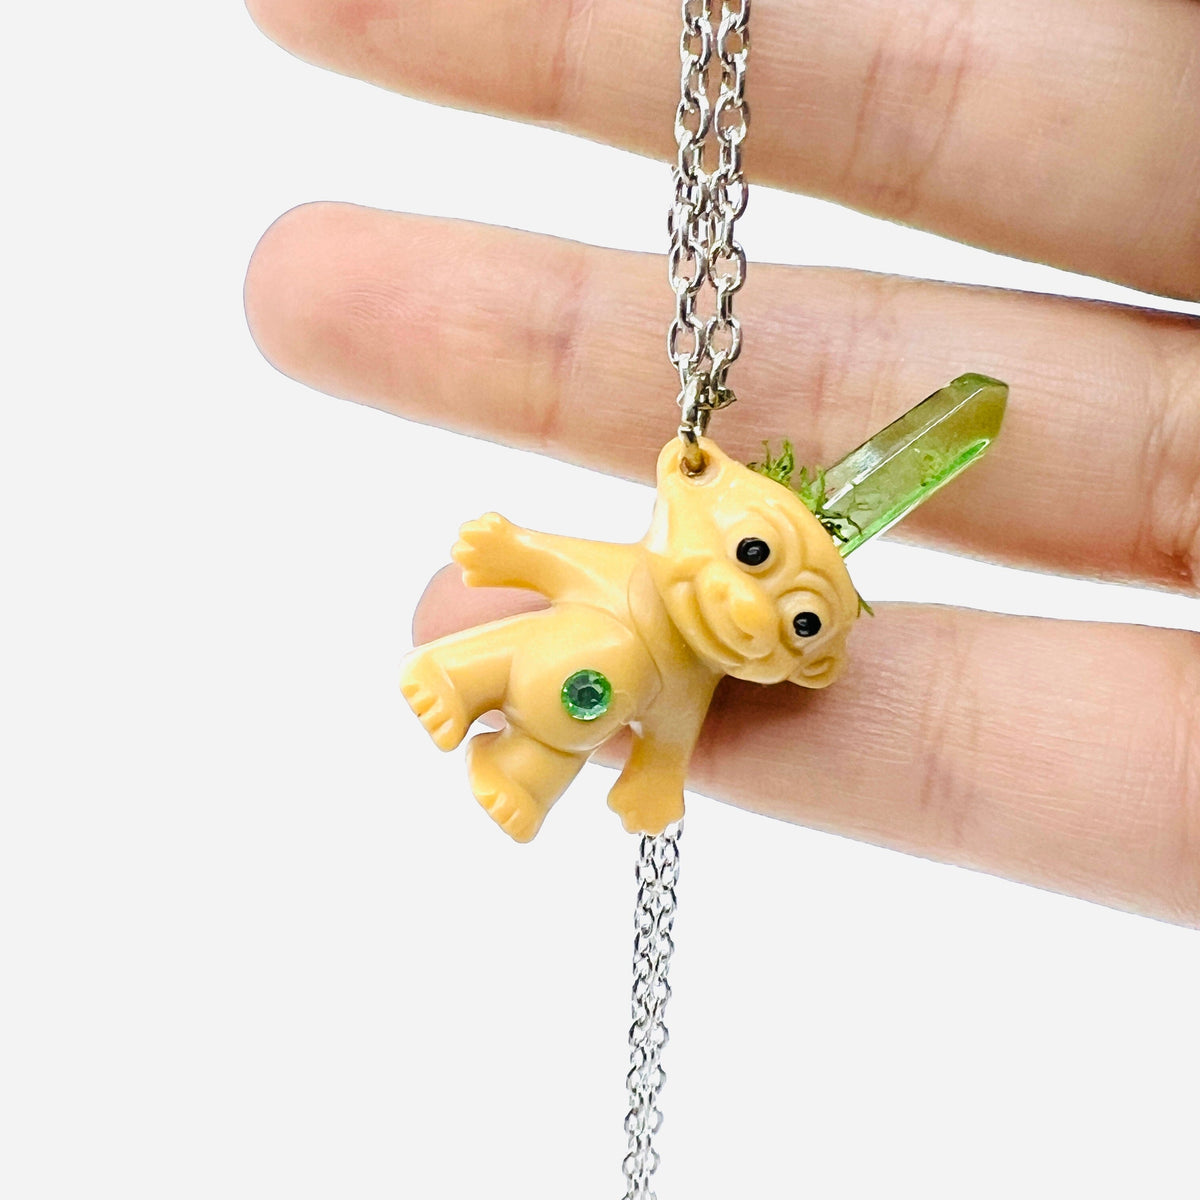 Crystal Troll Doll Necklace Jewelry - 